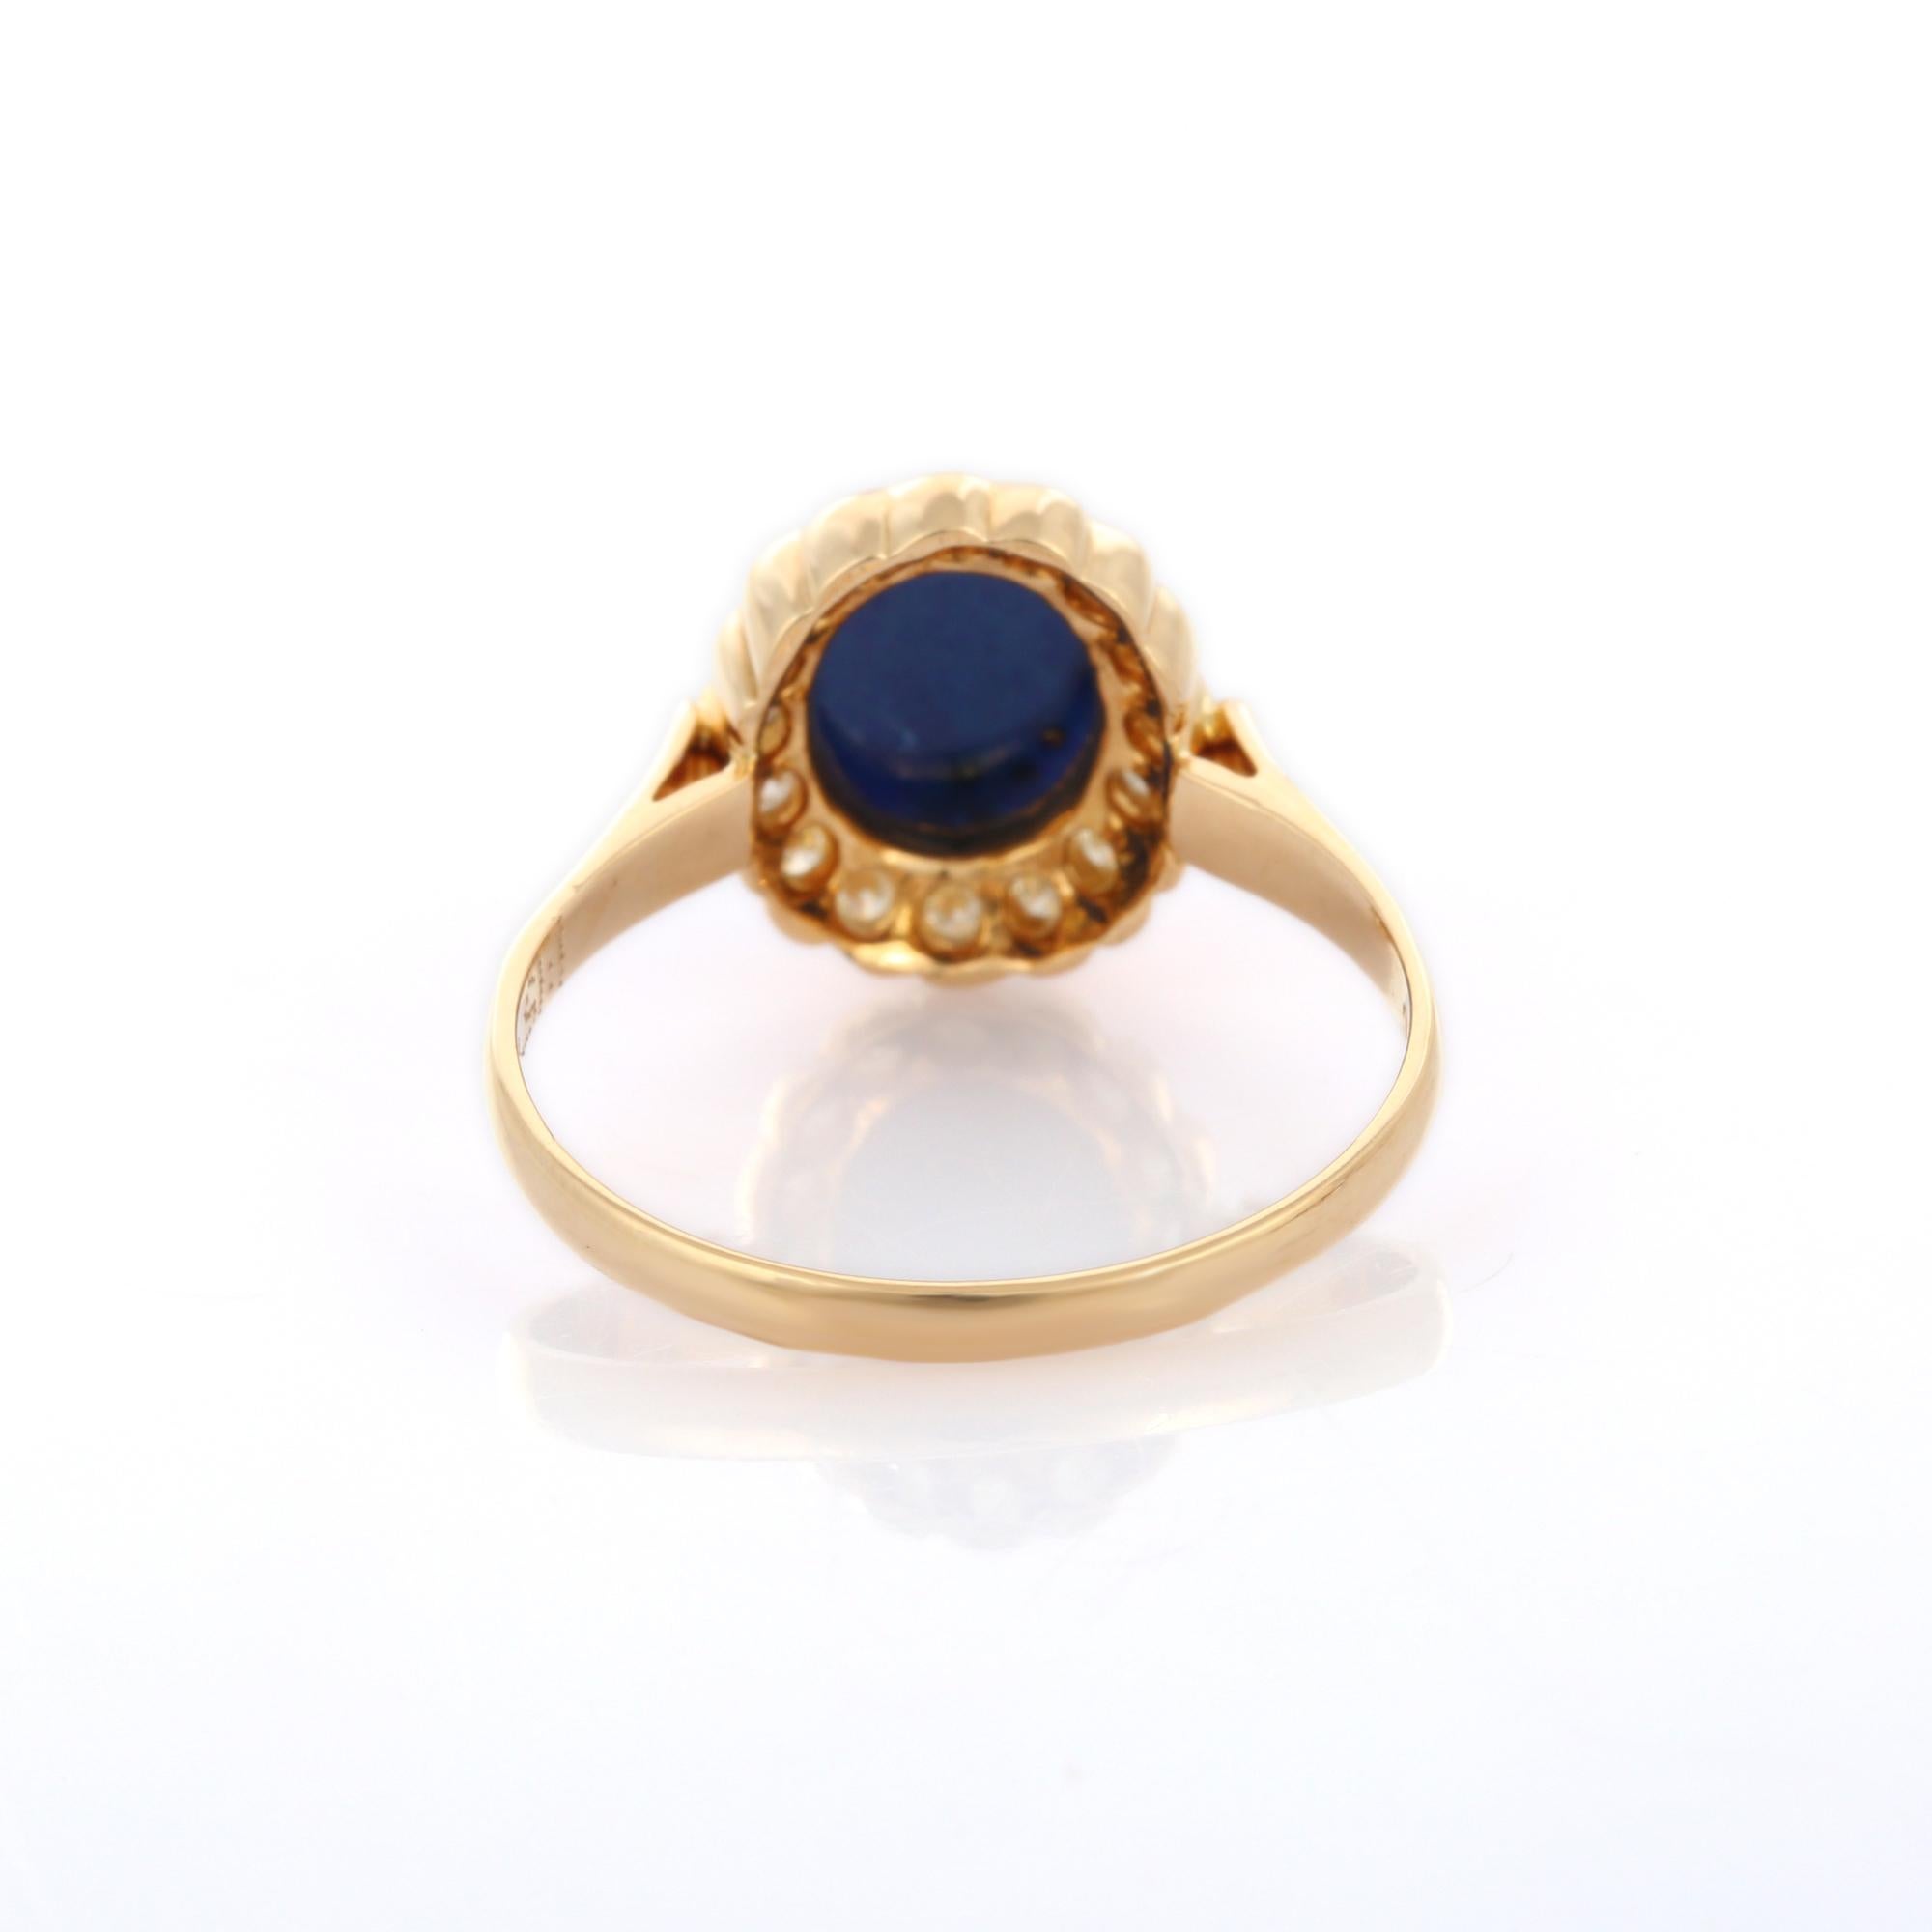 For Sale:  18K Yellow Gold 1.15 Carat Lapis Lazuli with Halo Diamond Cocktail Ring 5